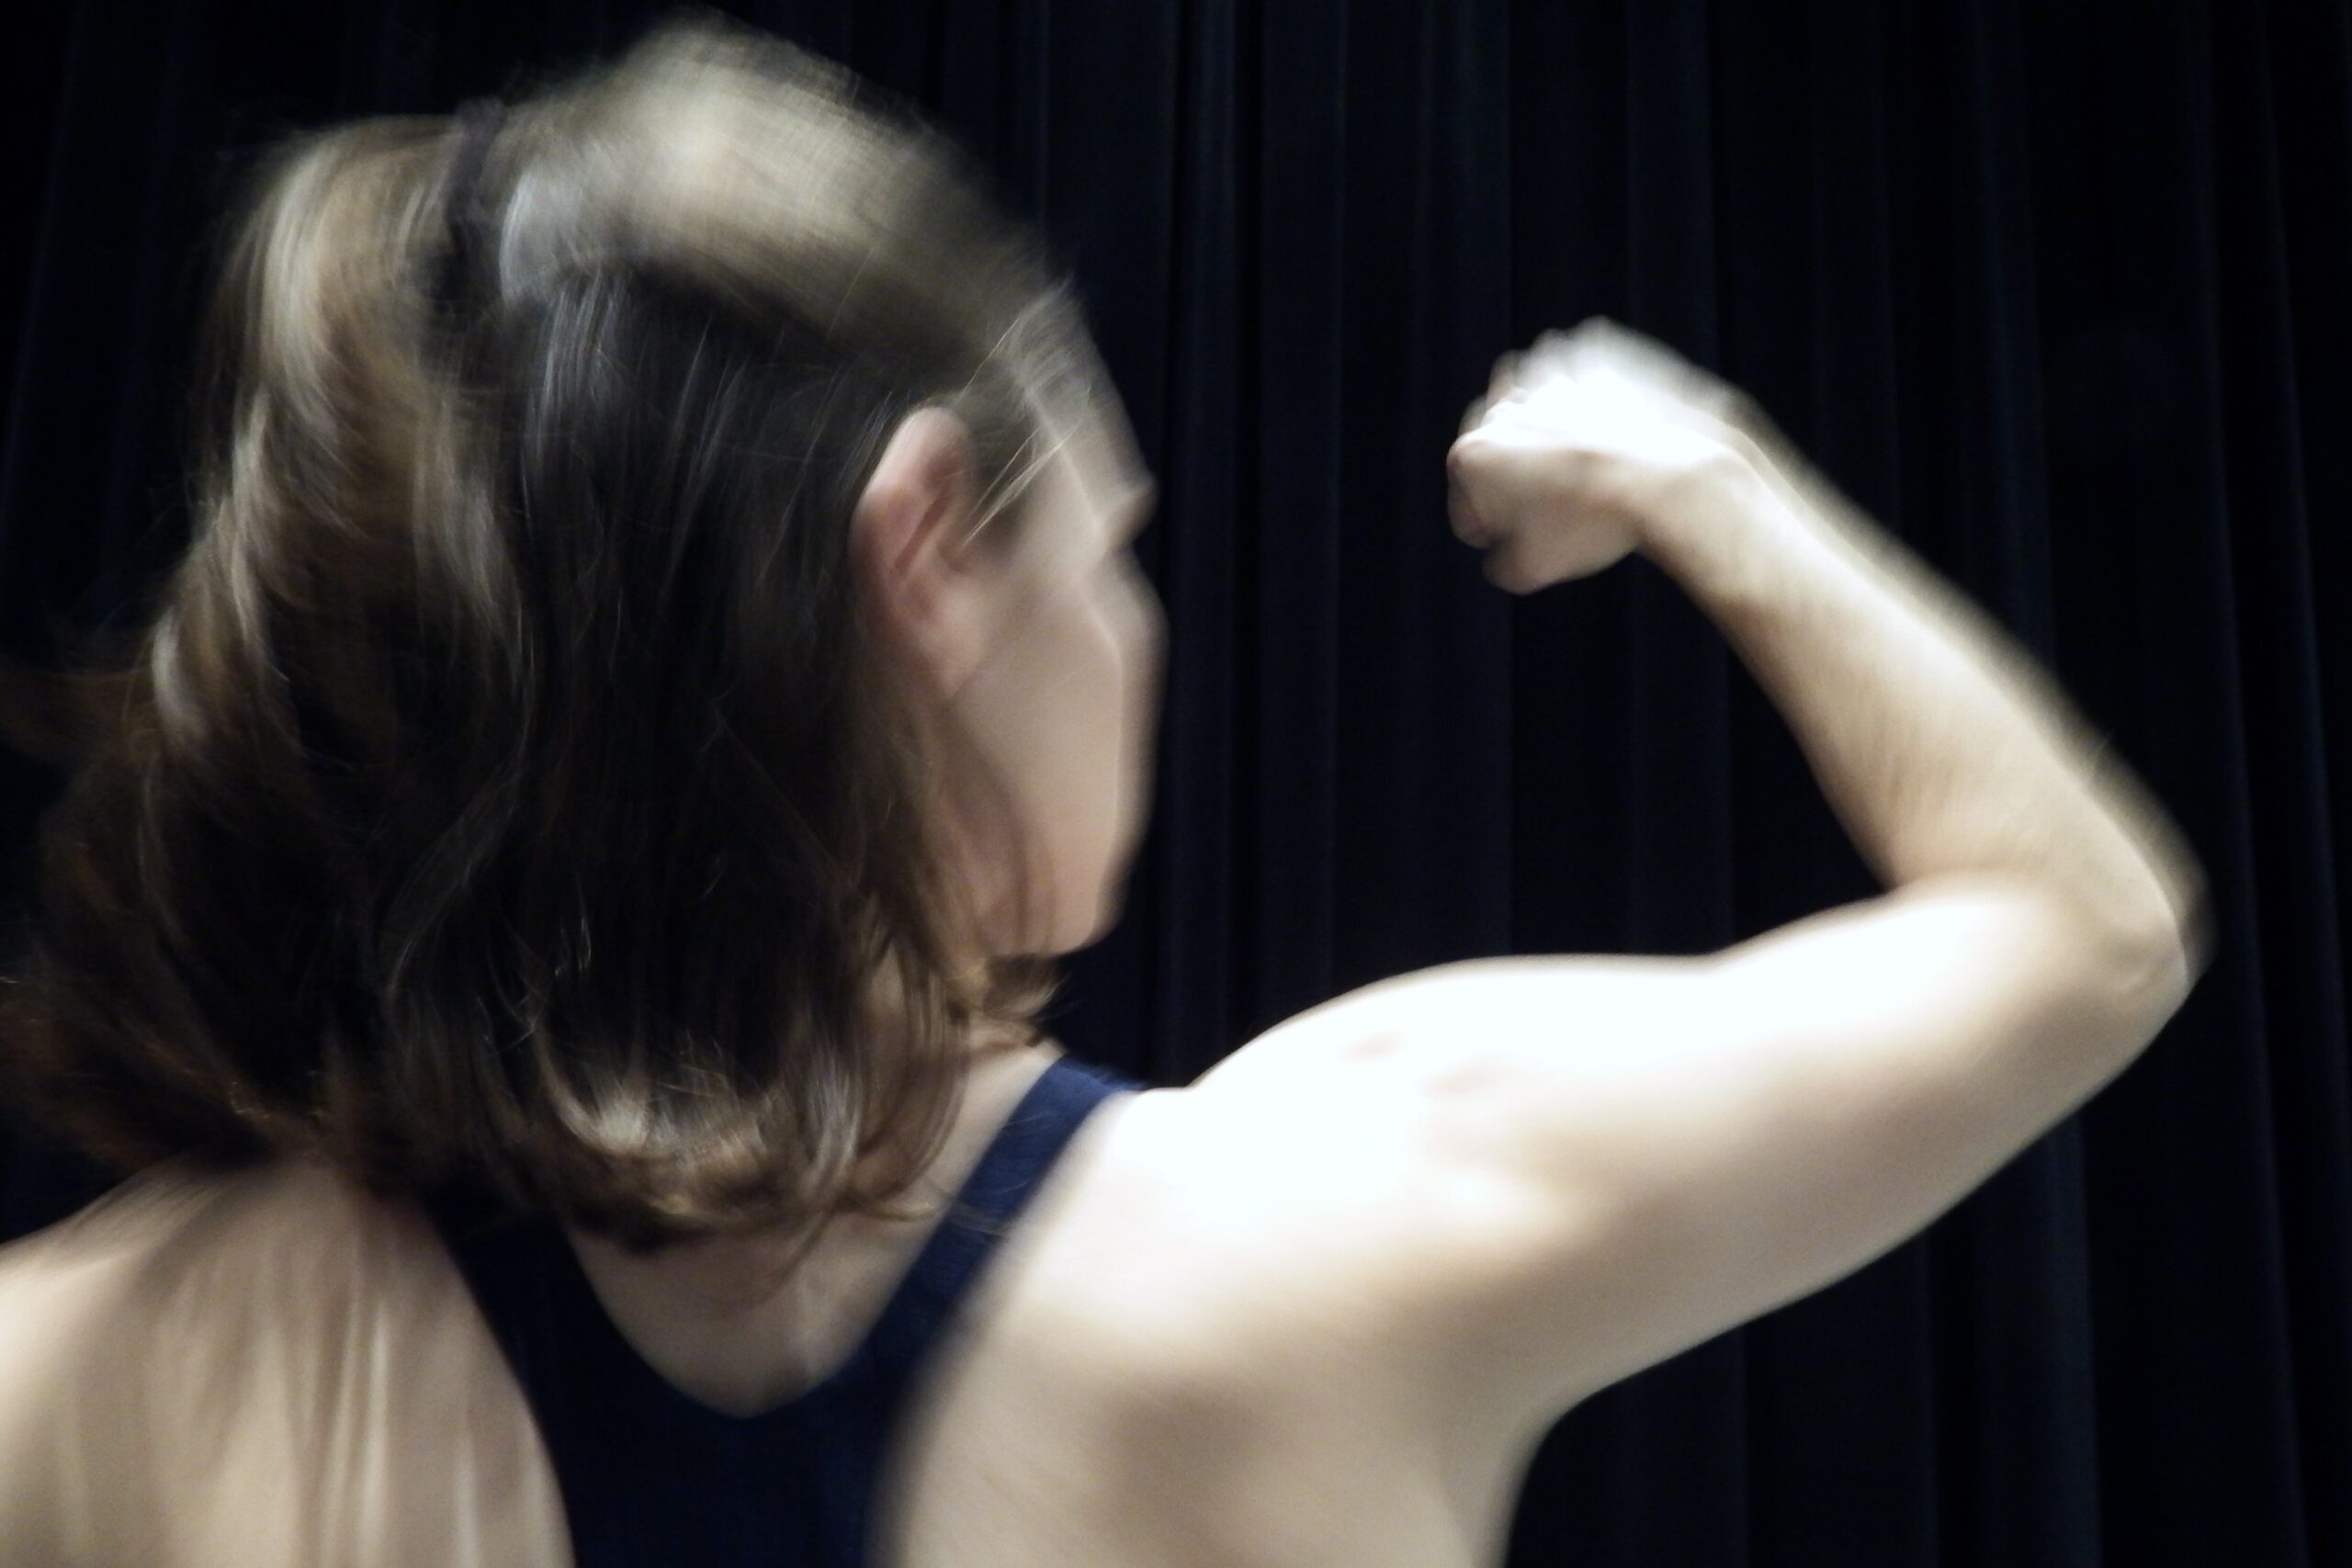 A dancer with short brown hair is captured in motion from the shoulders up in front of a black background. She is facing away from the camera and has her right first raised to eye level at her side.